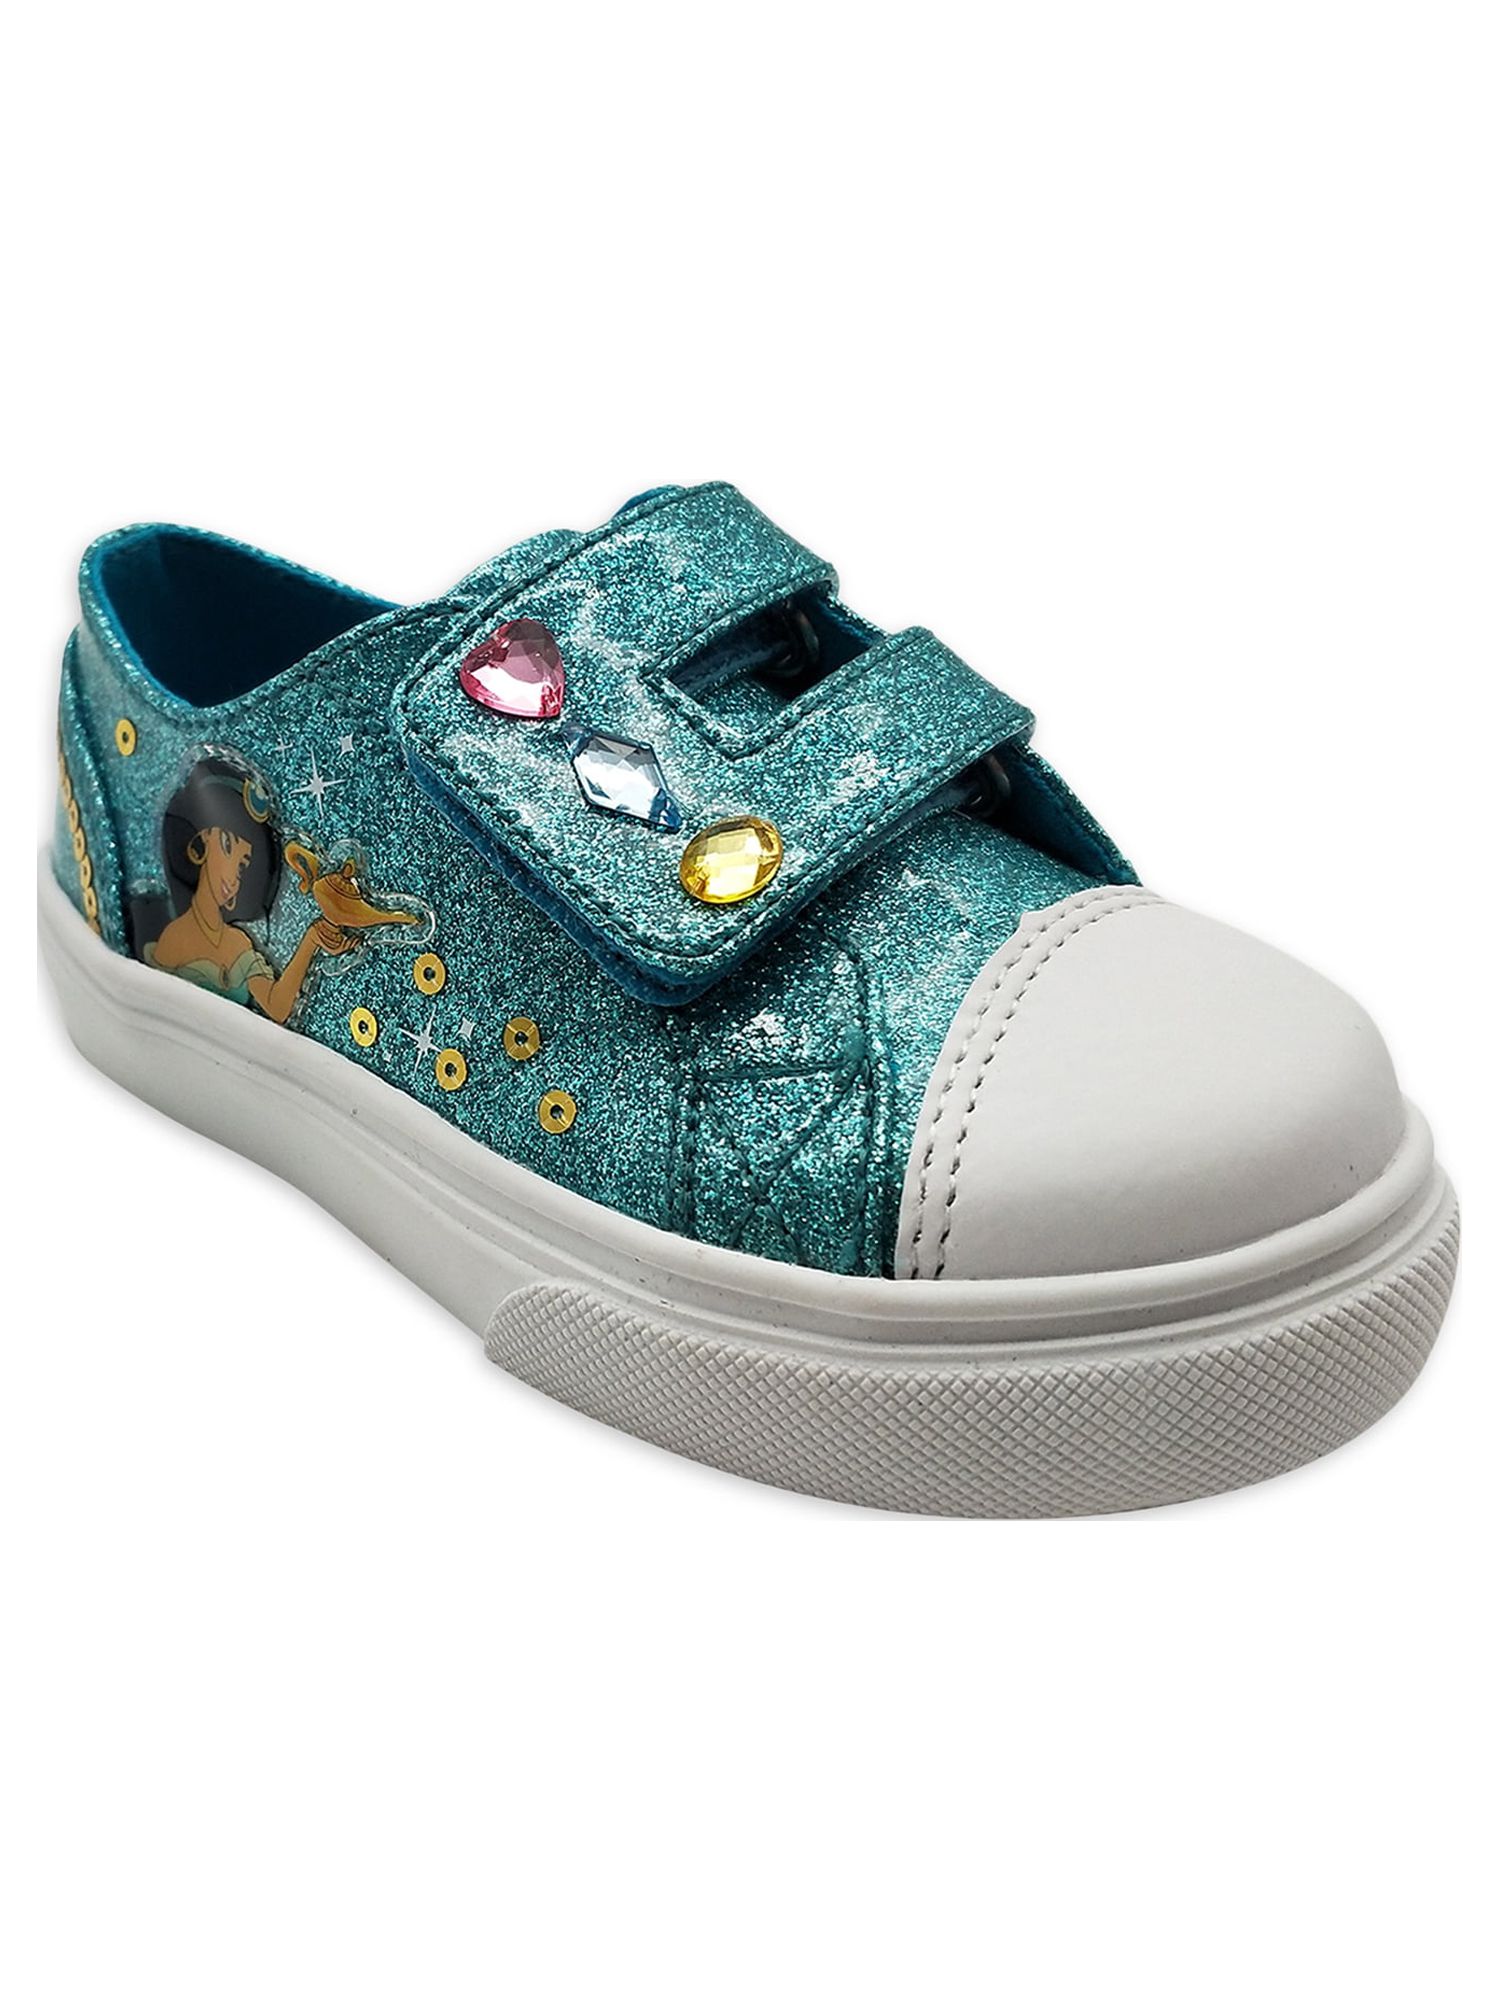 Disney Toddler Girls Aladdin Strap Casual Sneakers, Sizes 7-12 - image 1 of 6